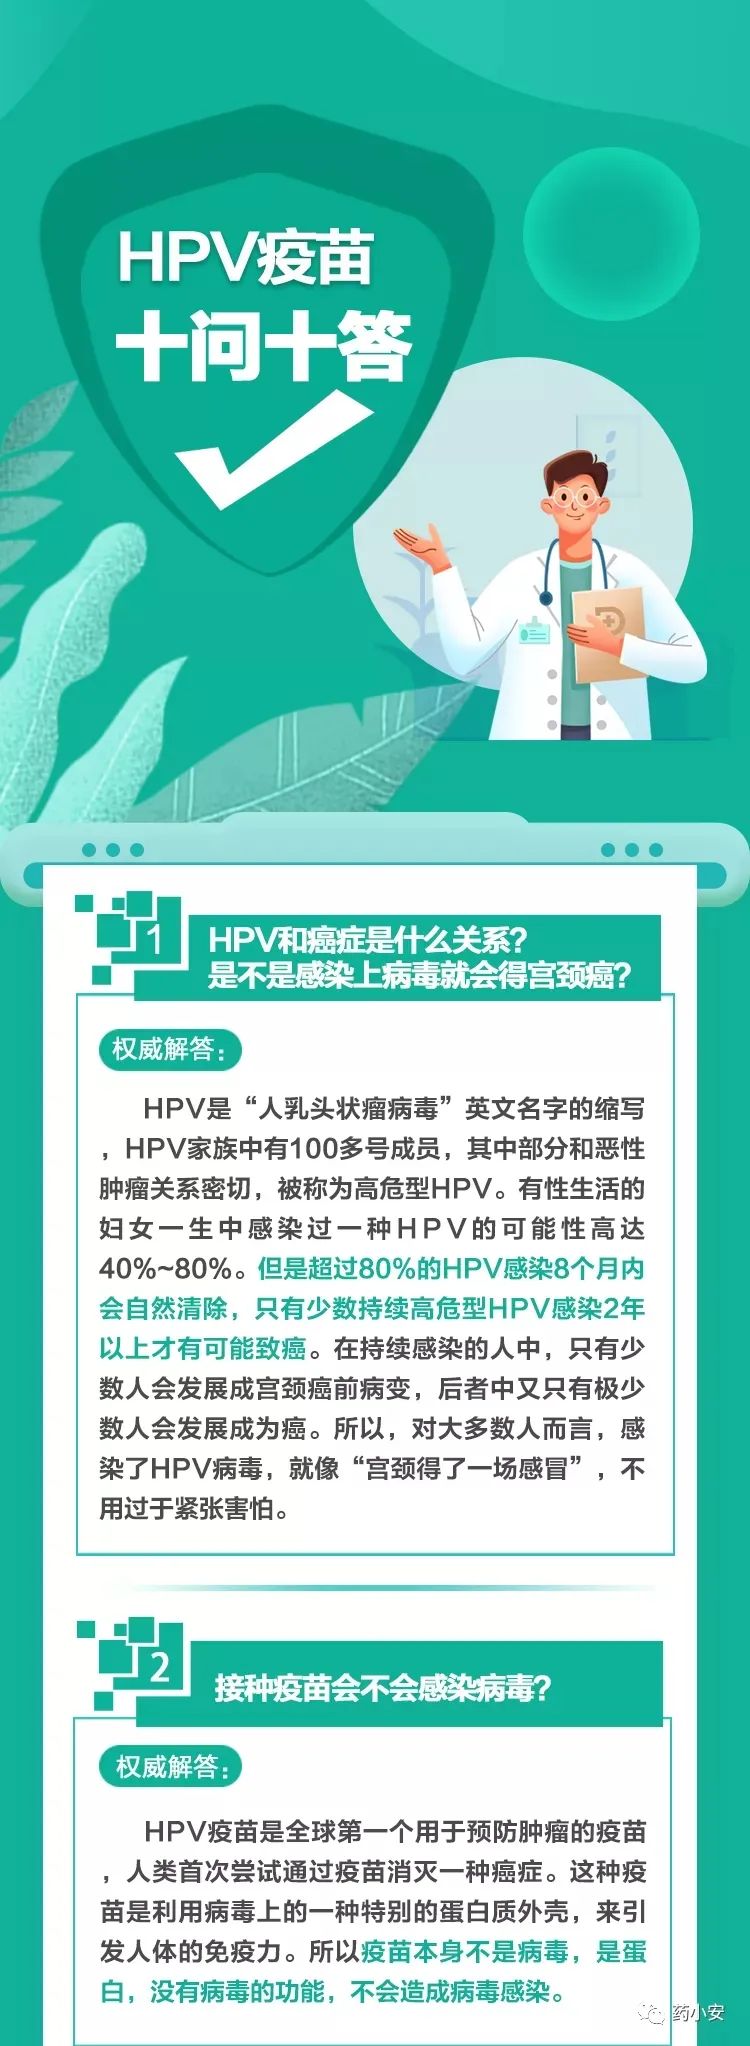 HPV is vaccinal 10 ask 10 answer, you want to know be here